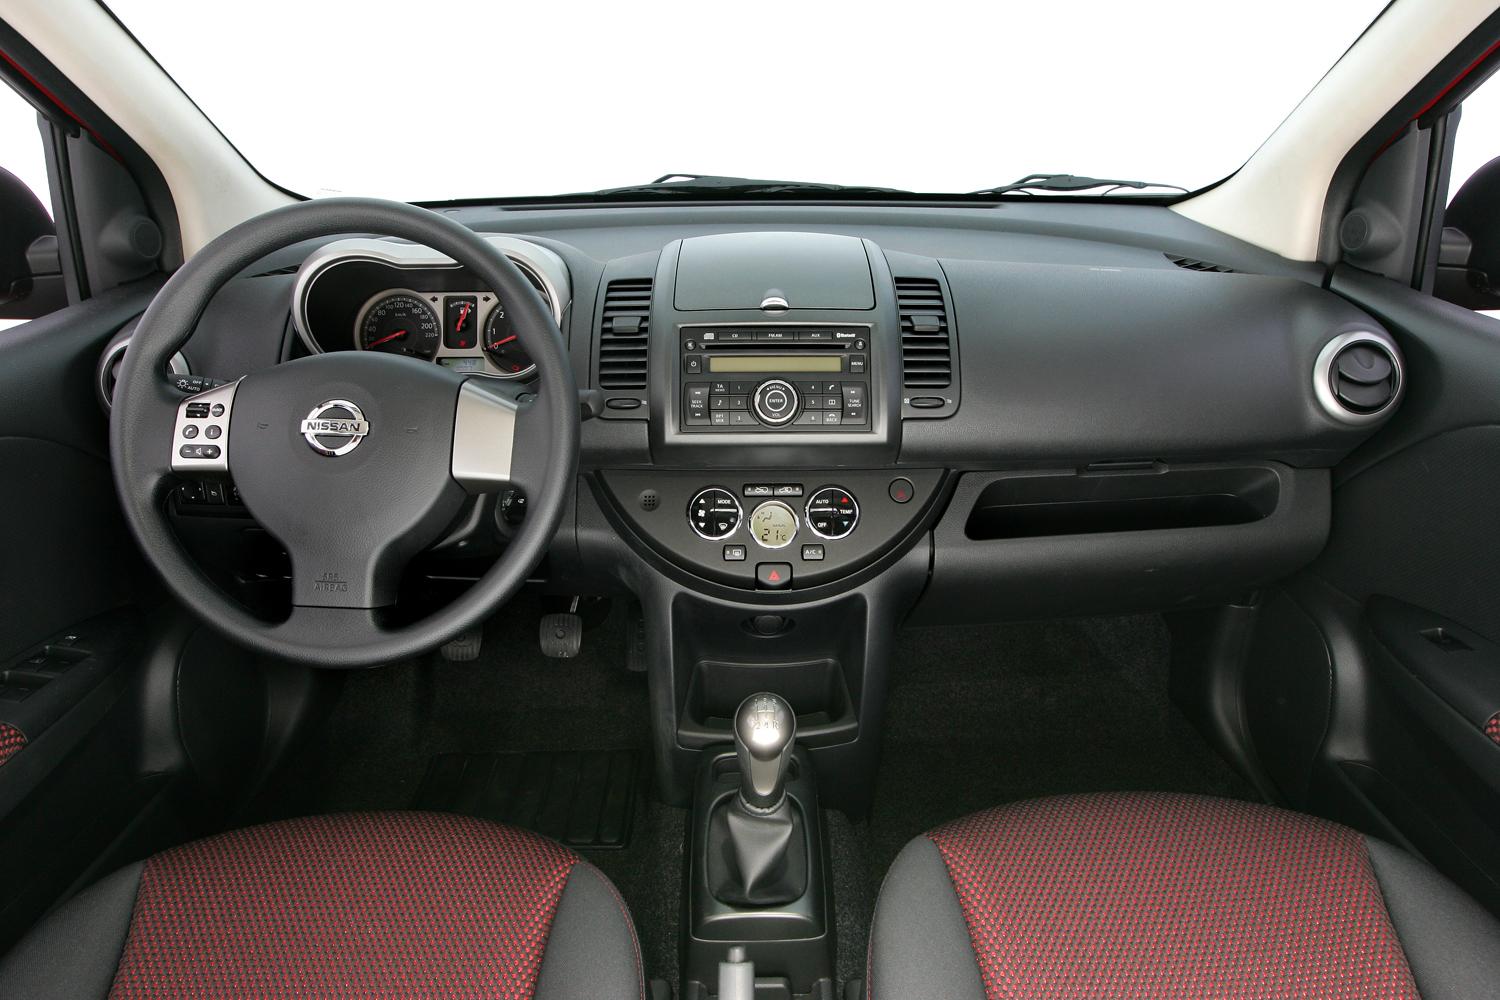 Nissan note e11 1.4. Nissan Note 2008 салон. Nissan Note 2008 интерьер. Nissan Note 2012 салон. Nissan Note 2005 салон.